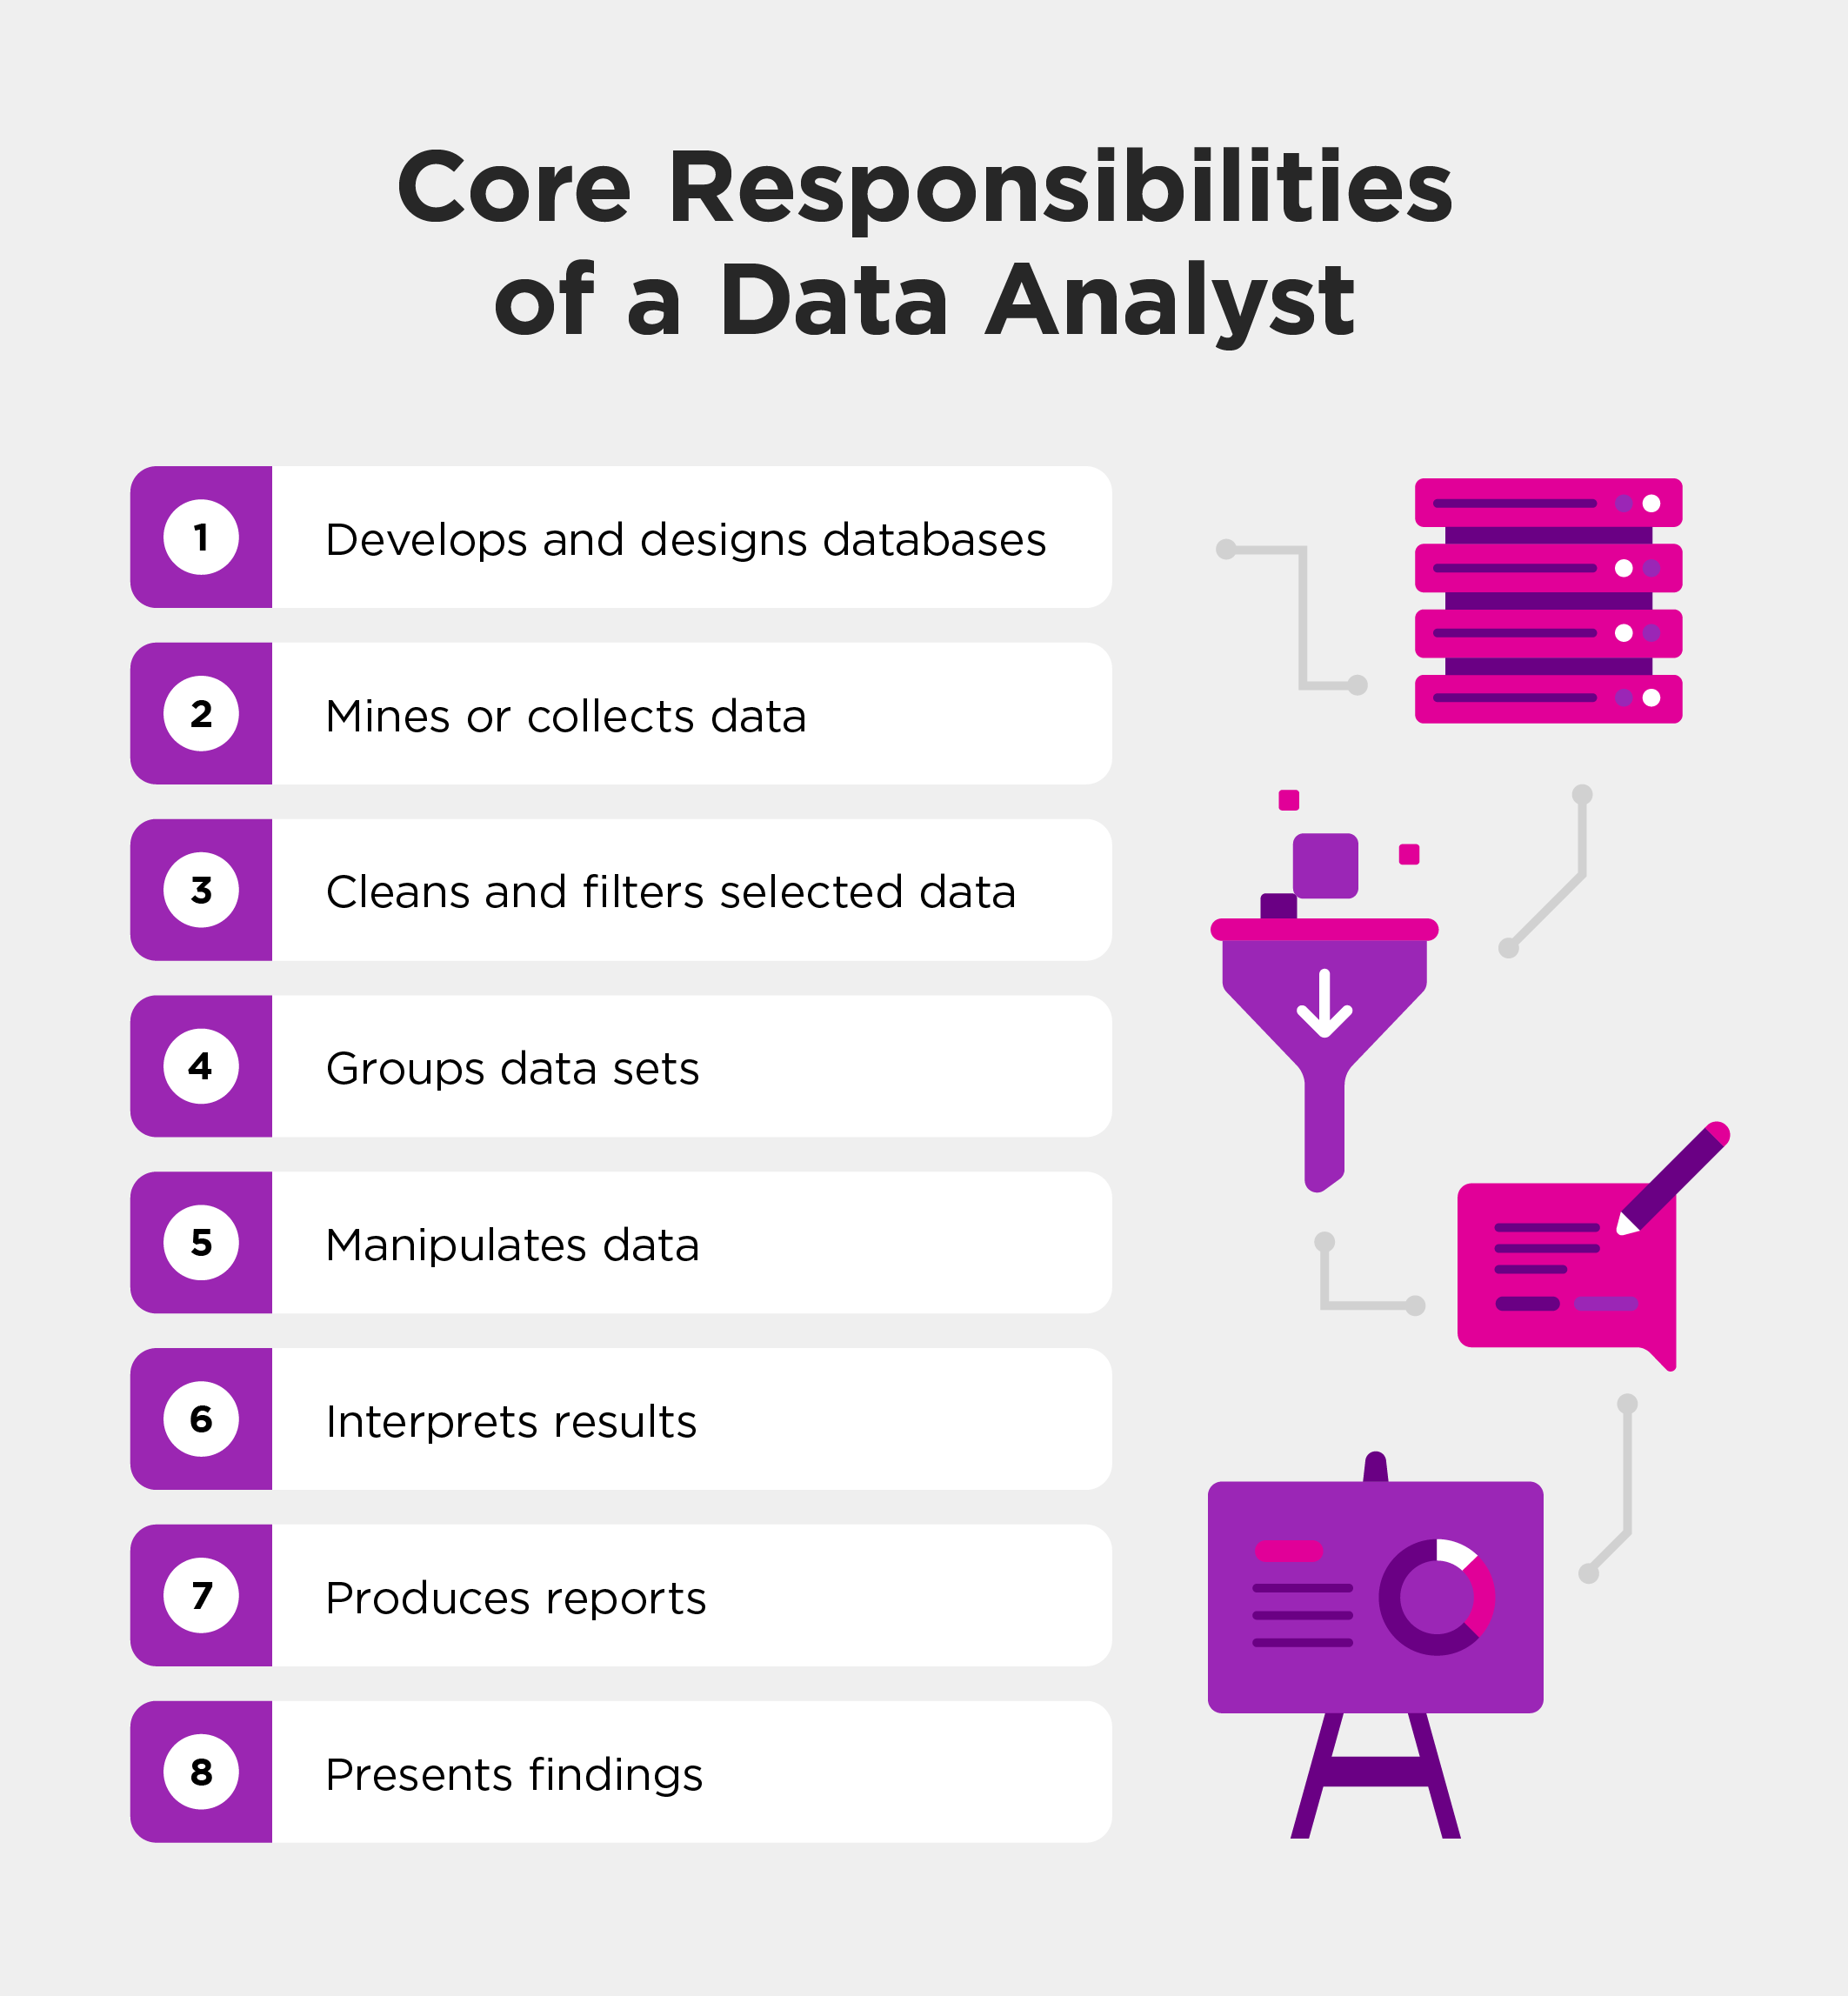 Image describes the core responsibilities of a data analyst.